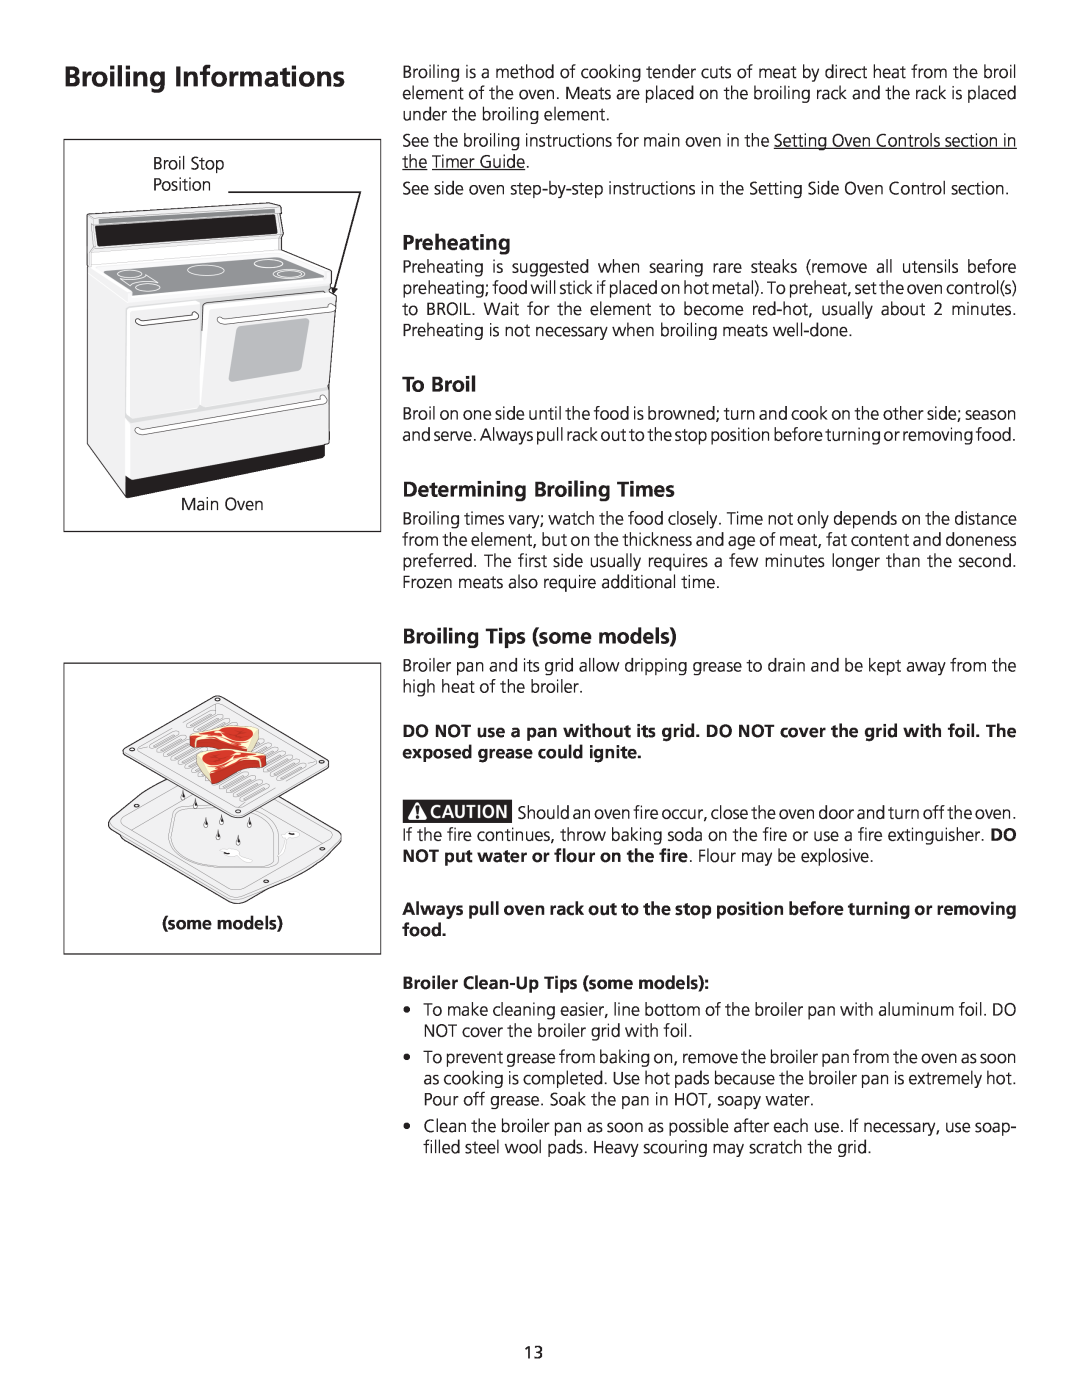 Frigidaire 318200710 Broiling Informations, Preheating, To Broil, Determining Broiling Times, Broiling Tips some models 